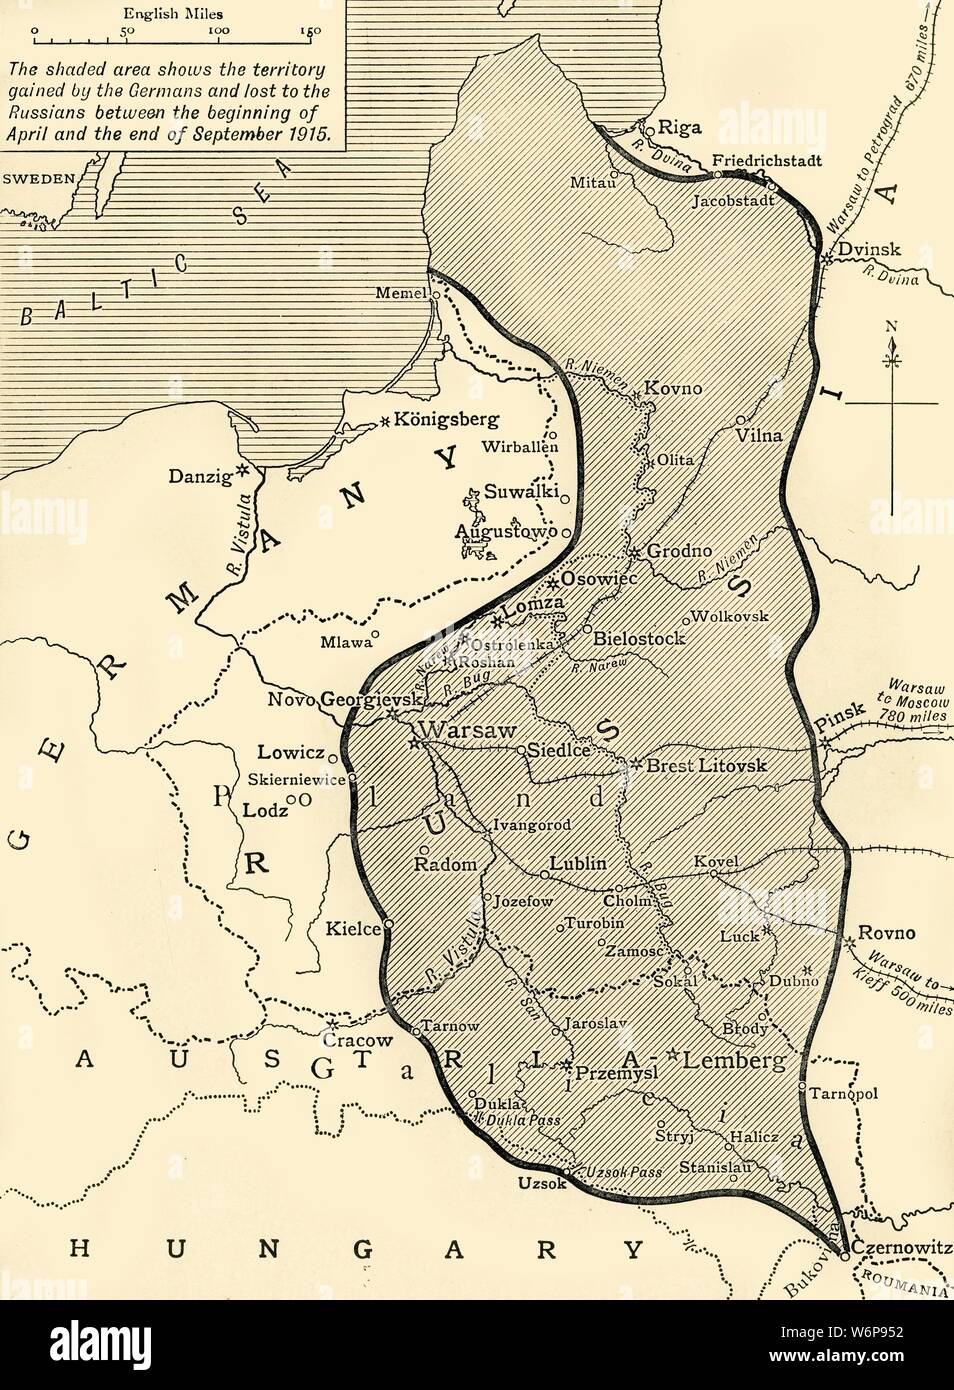 Land taken by Germany from Russia, First World War, 1915, (c1920). 'The Germanic Slice out of Russian Territory to the end of the Summer Campaign of 1915...territory gained by the Germans and lost to the Russians between the beginning of April and the end of September'. From &quot;The Great World War - A History&quot; Volume IV, edited by Frank A Mumby. [The Gresham Publishing Company Ltd, London, c1920] Stock Photo